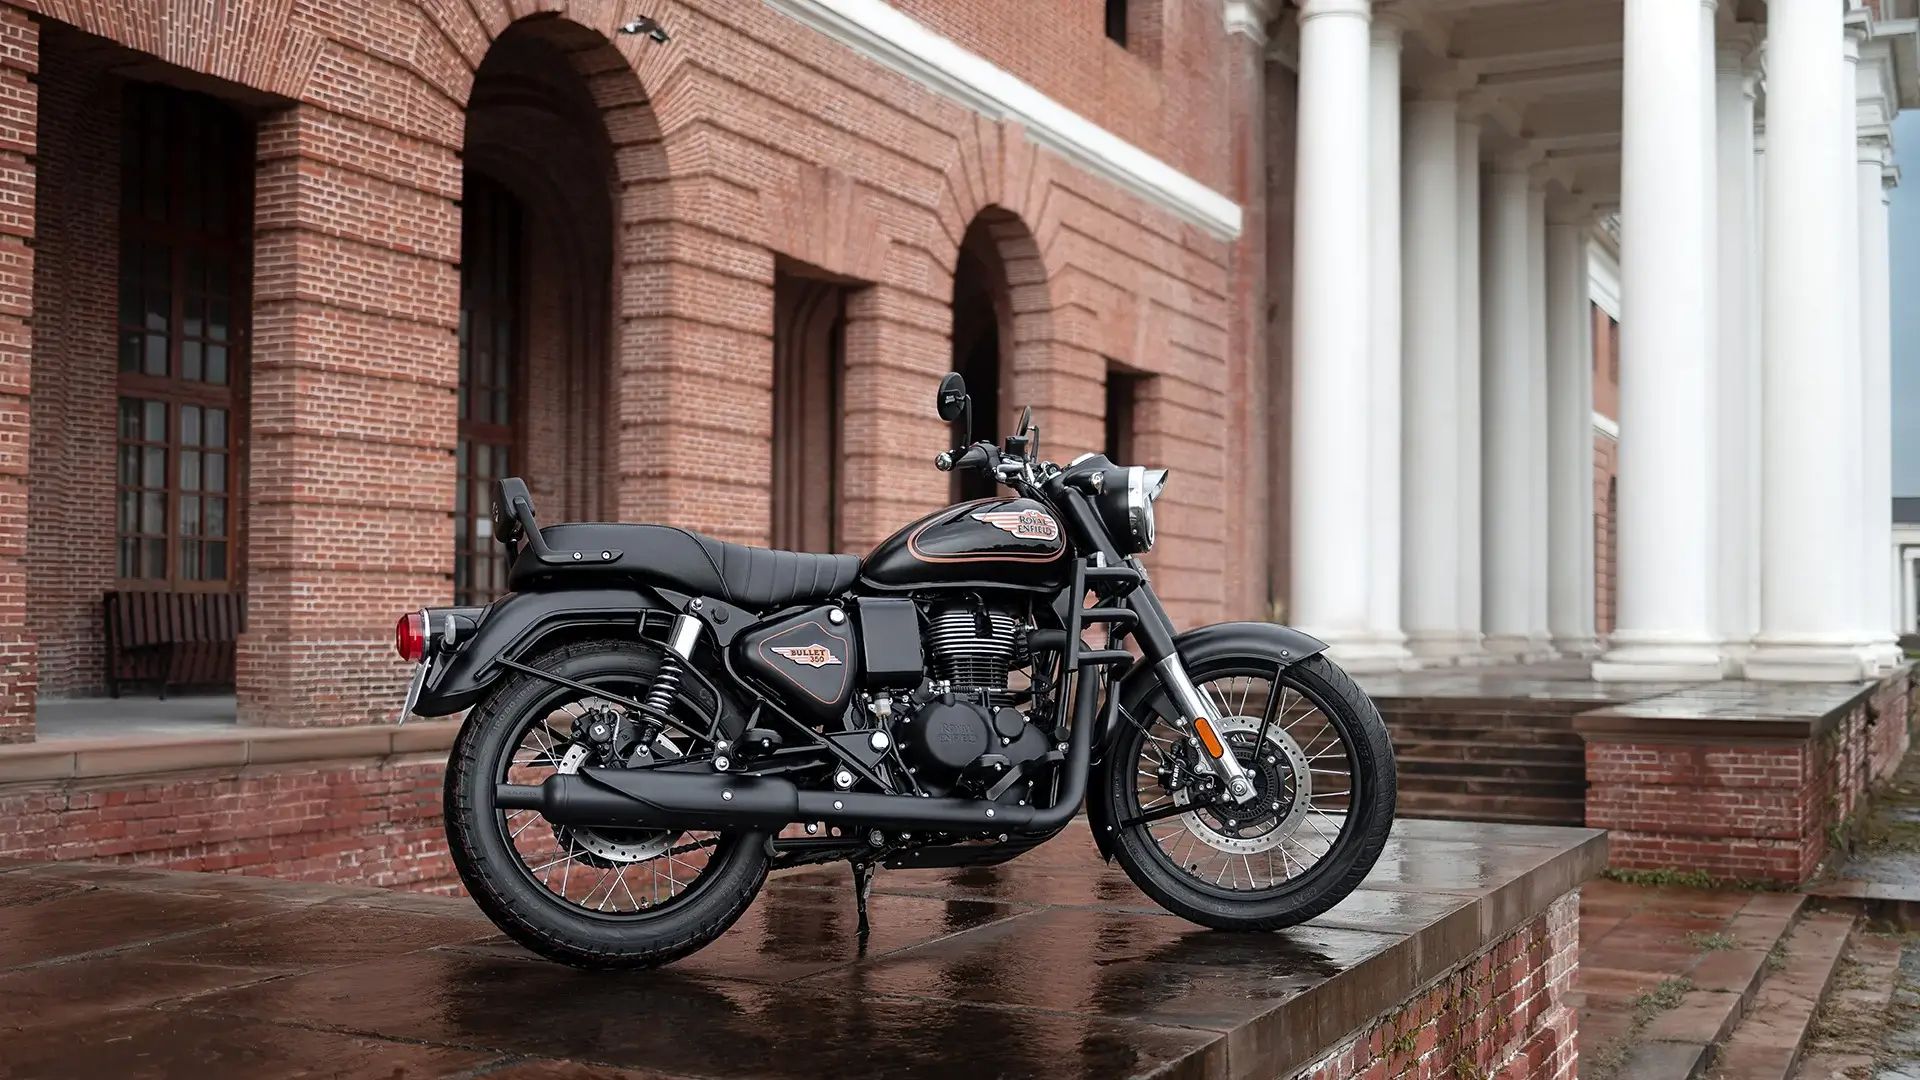 2023 Royal Enfield Bullet: Everything We Know So Far